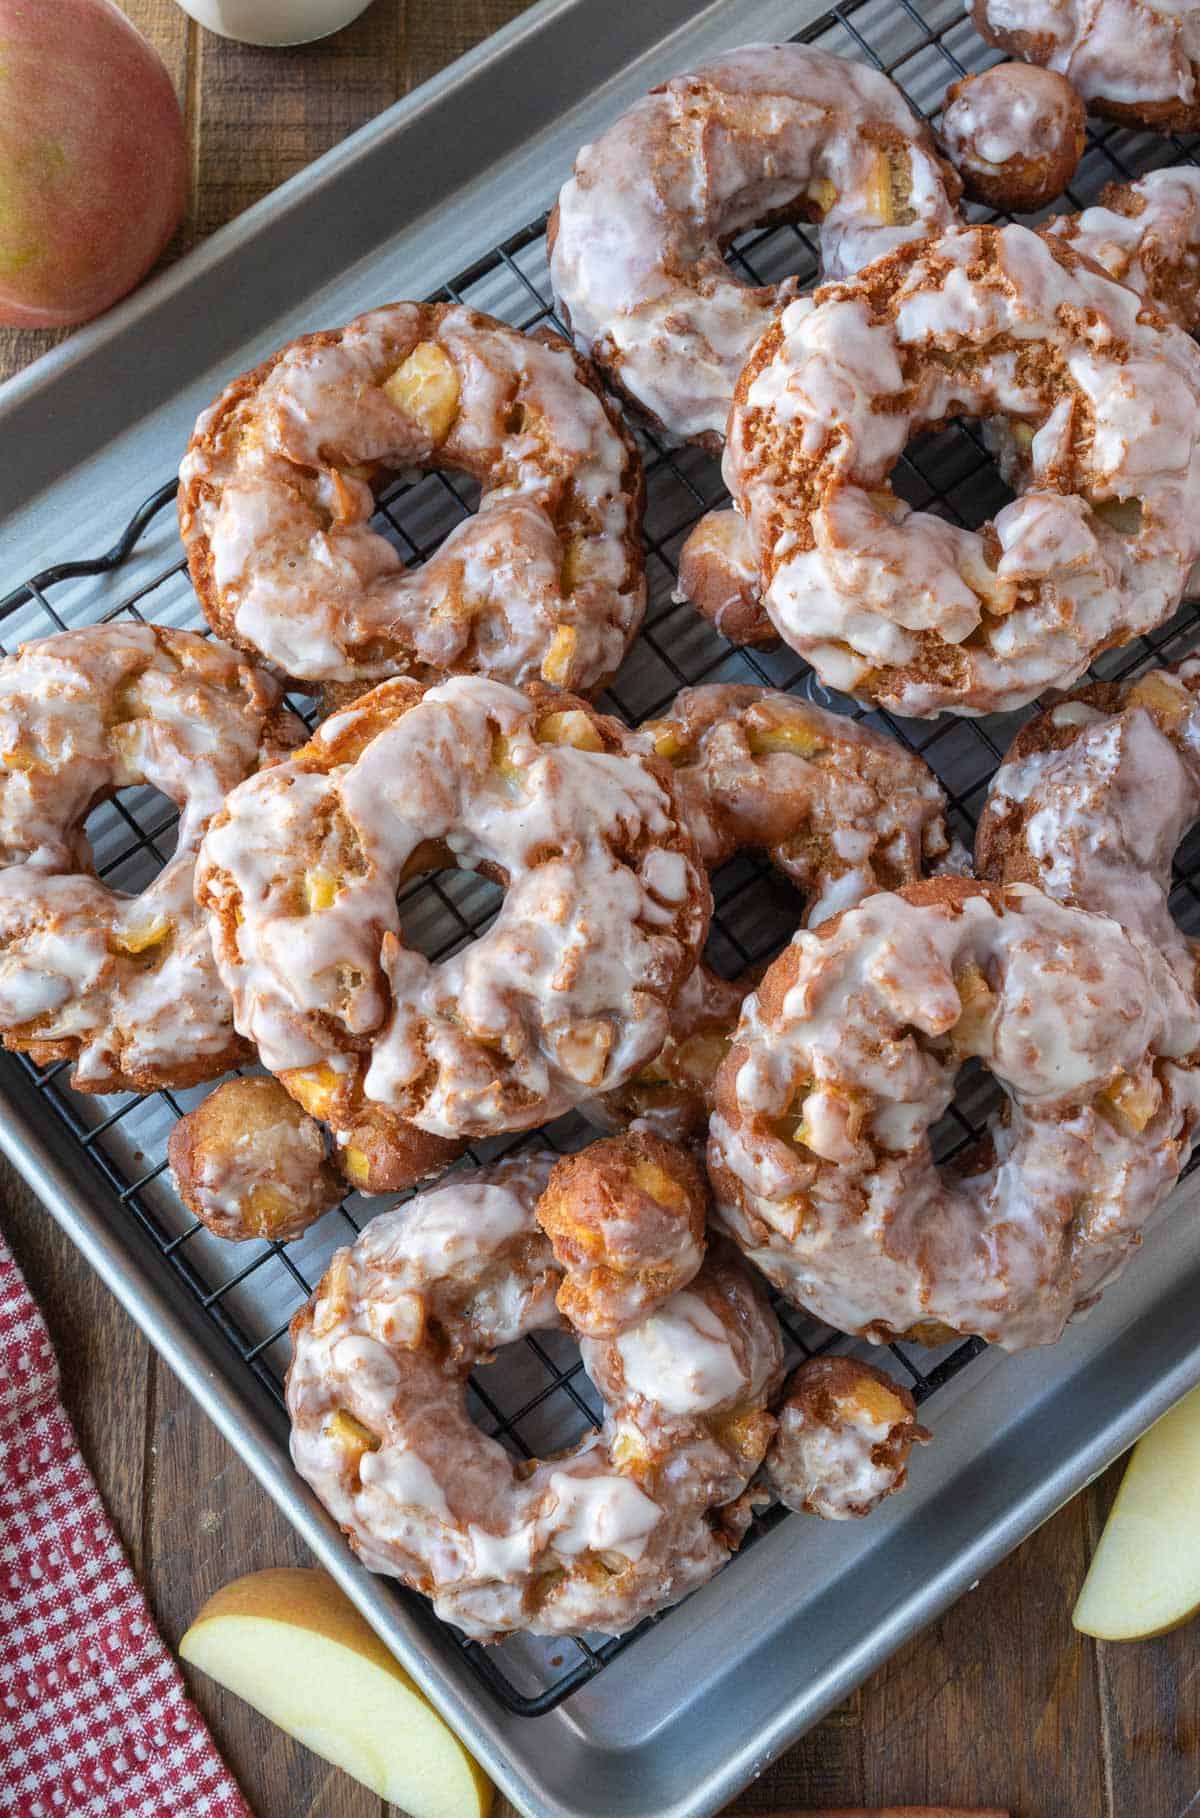 Apple cider donuts piled on a baking sheet.